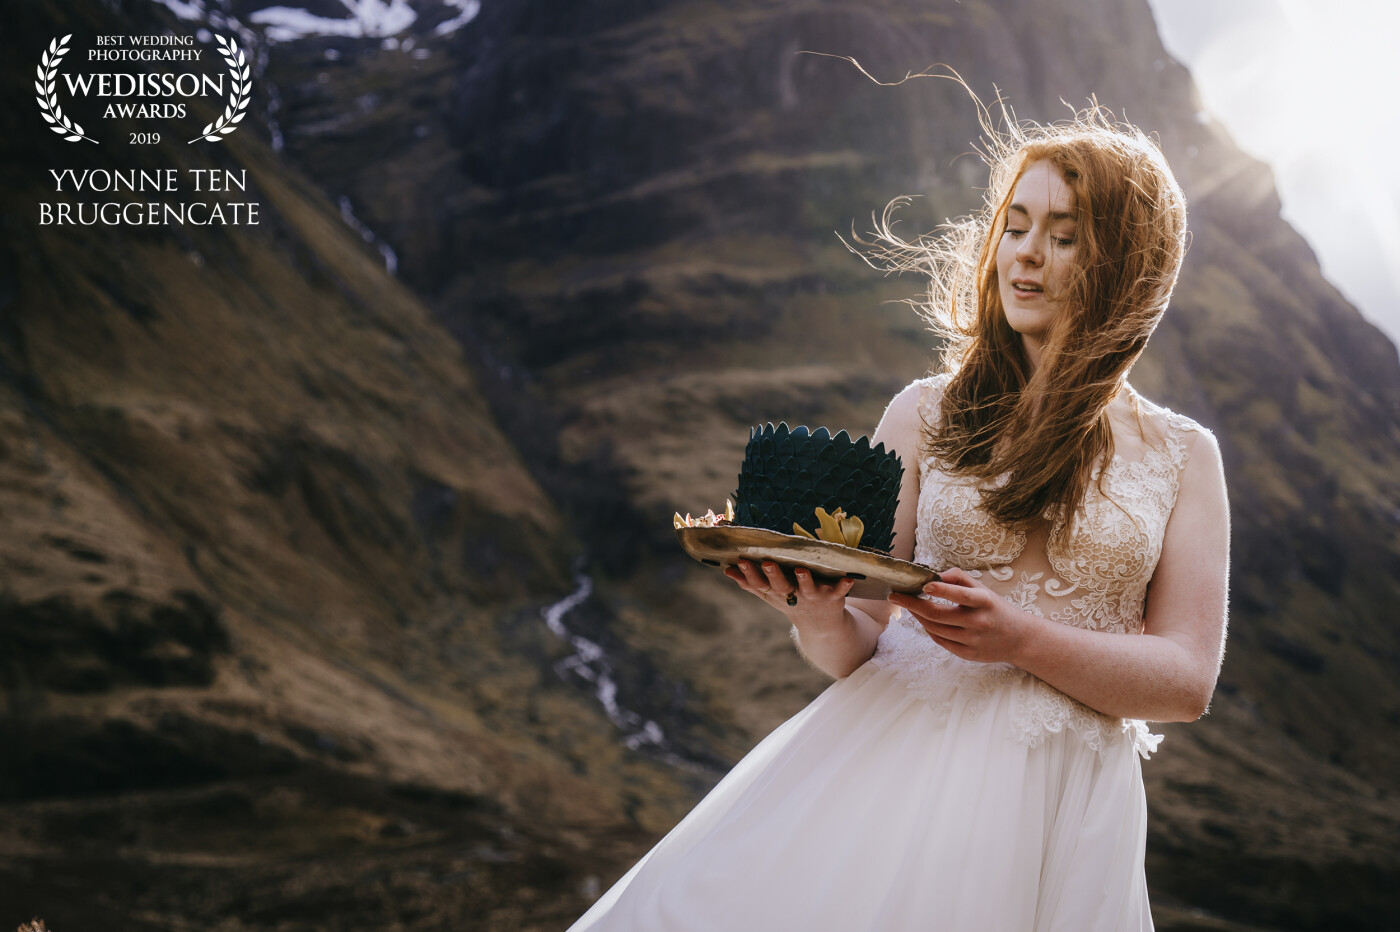 This is beautiful Emma in the mountains of Scotland. It was taken at ‘the three sisters’ a beautiful spot at Scotland highlands with three mountains. We had to run for the rain showers several times. It was freezing cold, but Emma wanted to go on, to get the most beautiful wedding pictures. And when the sun popped out the magic happened 